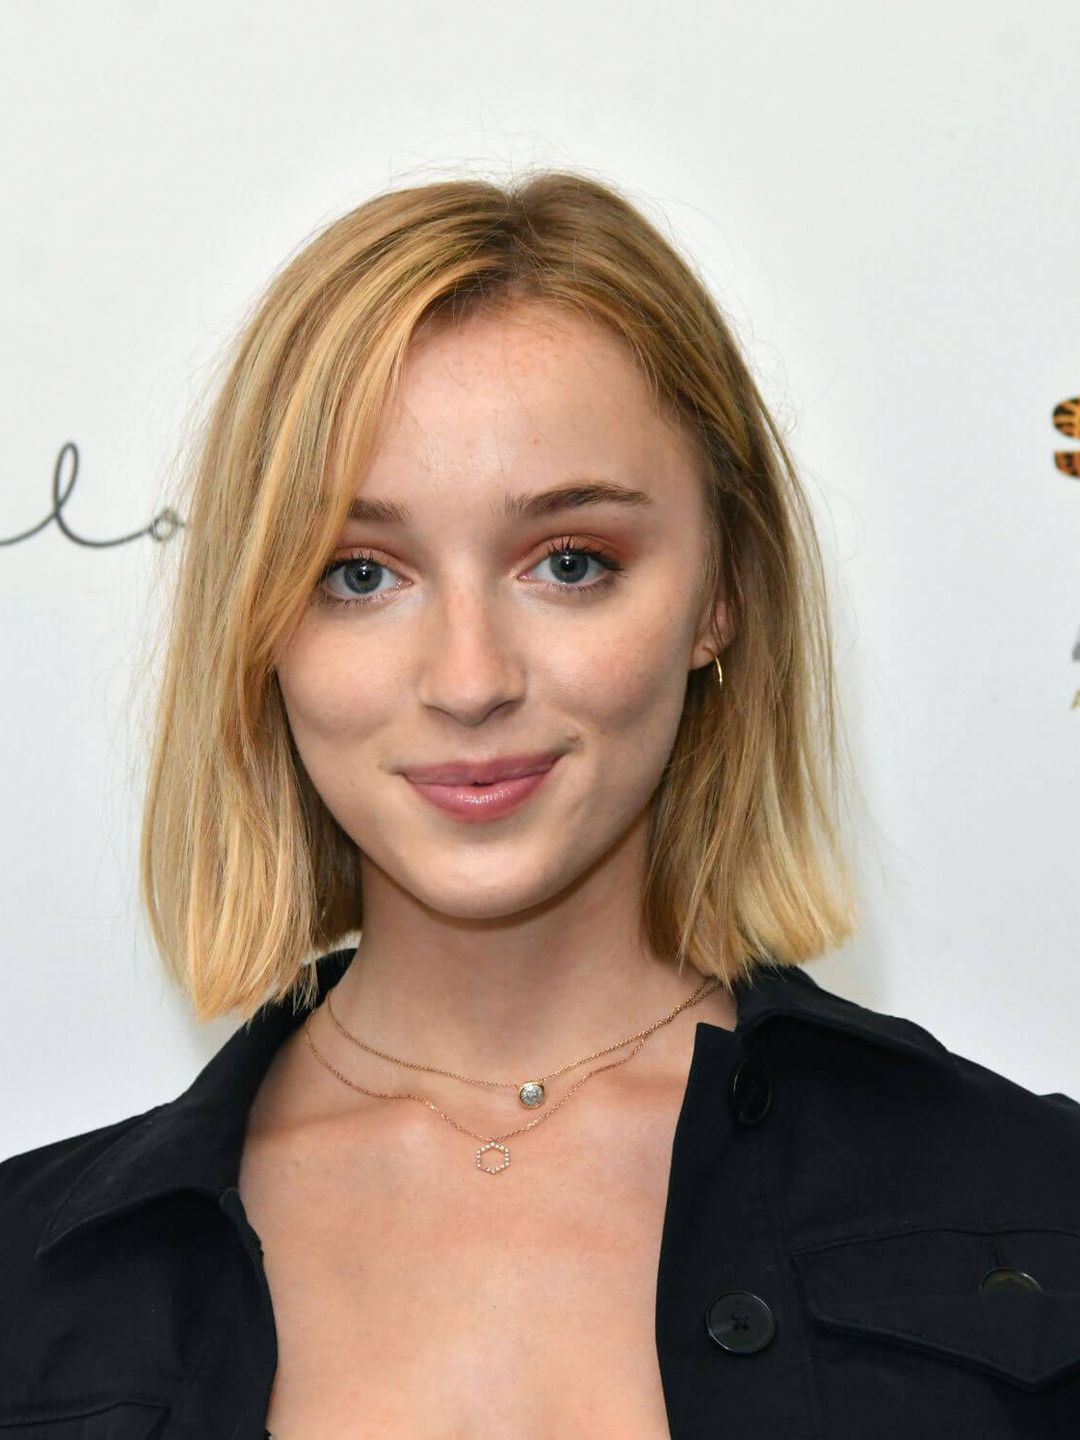 Phoebe Dynevor young age